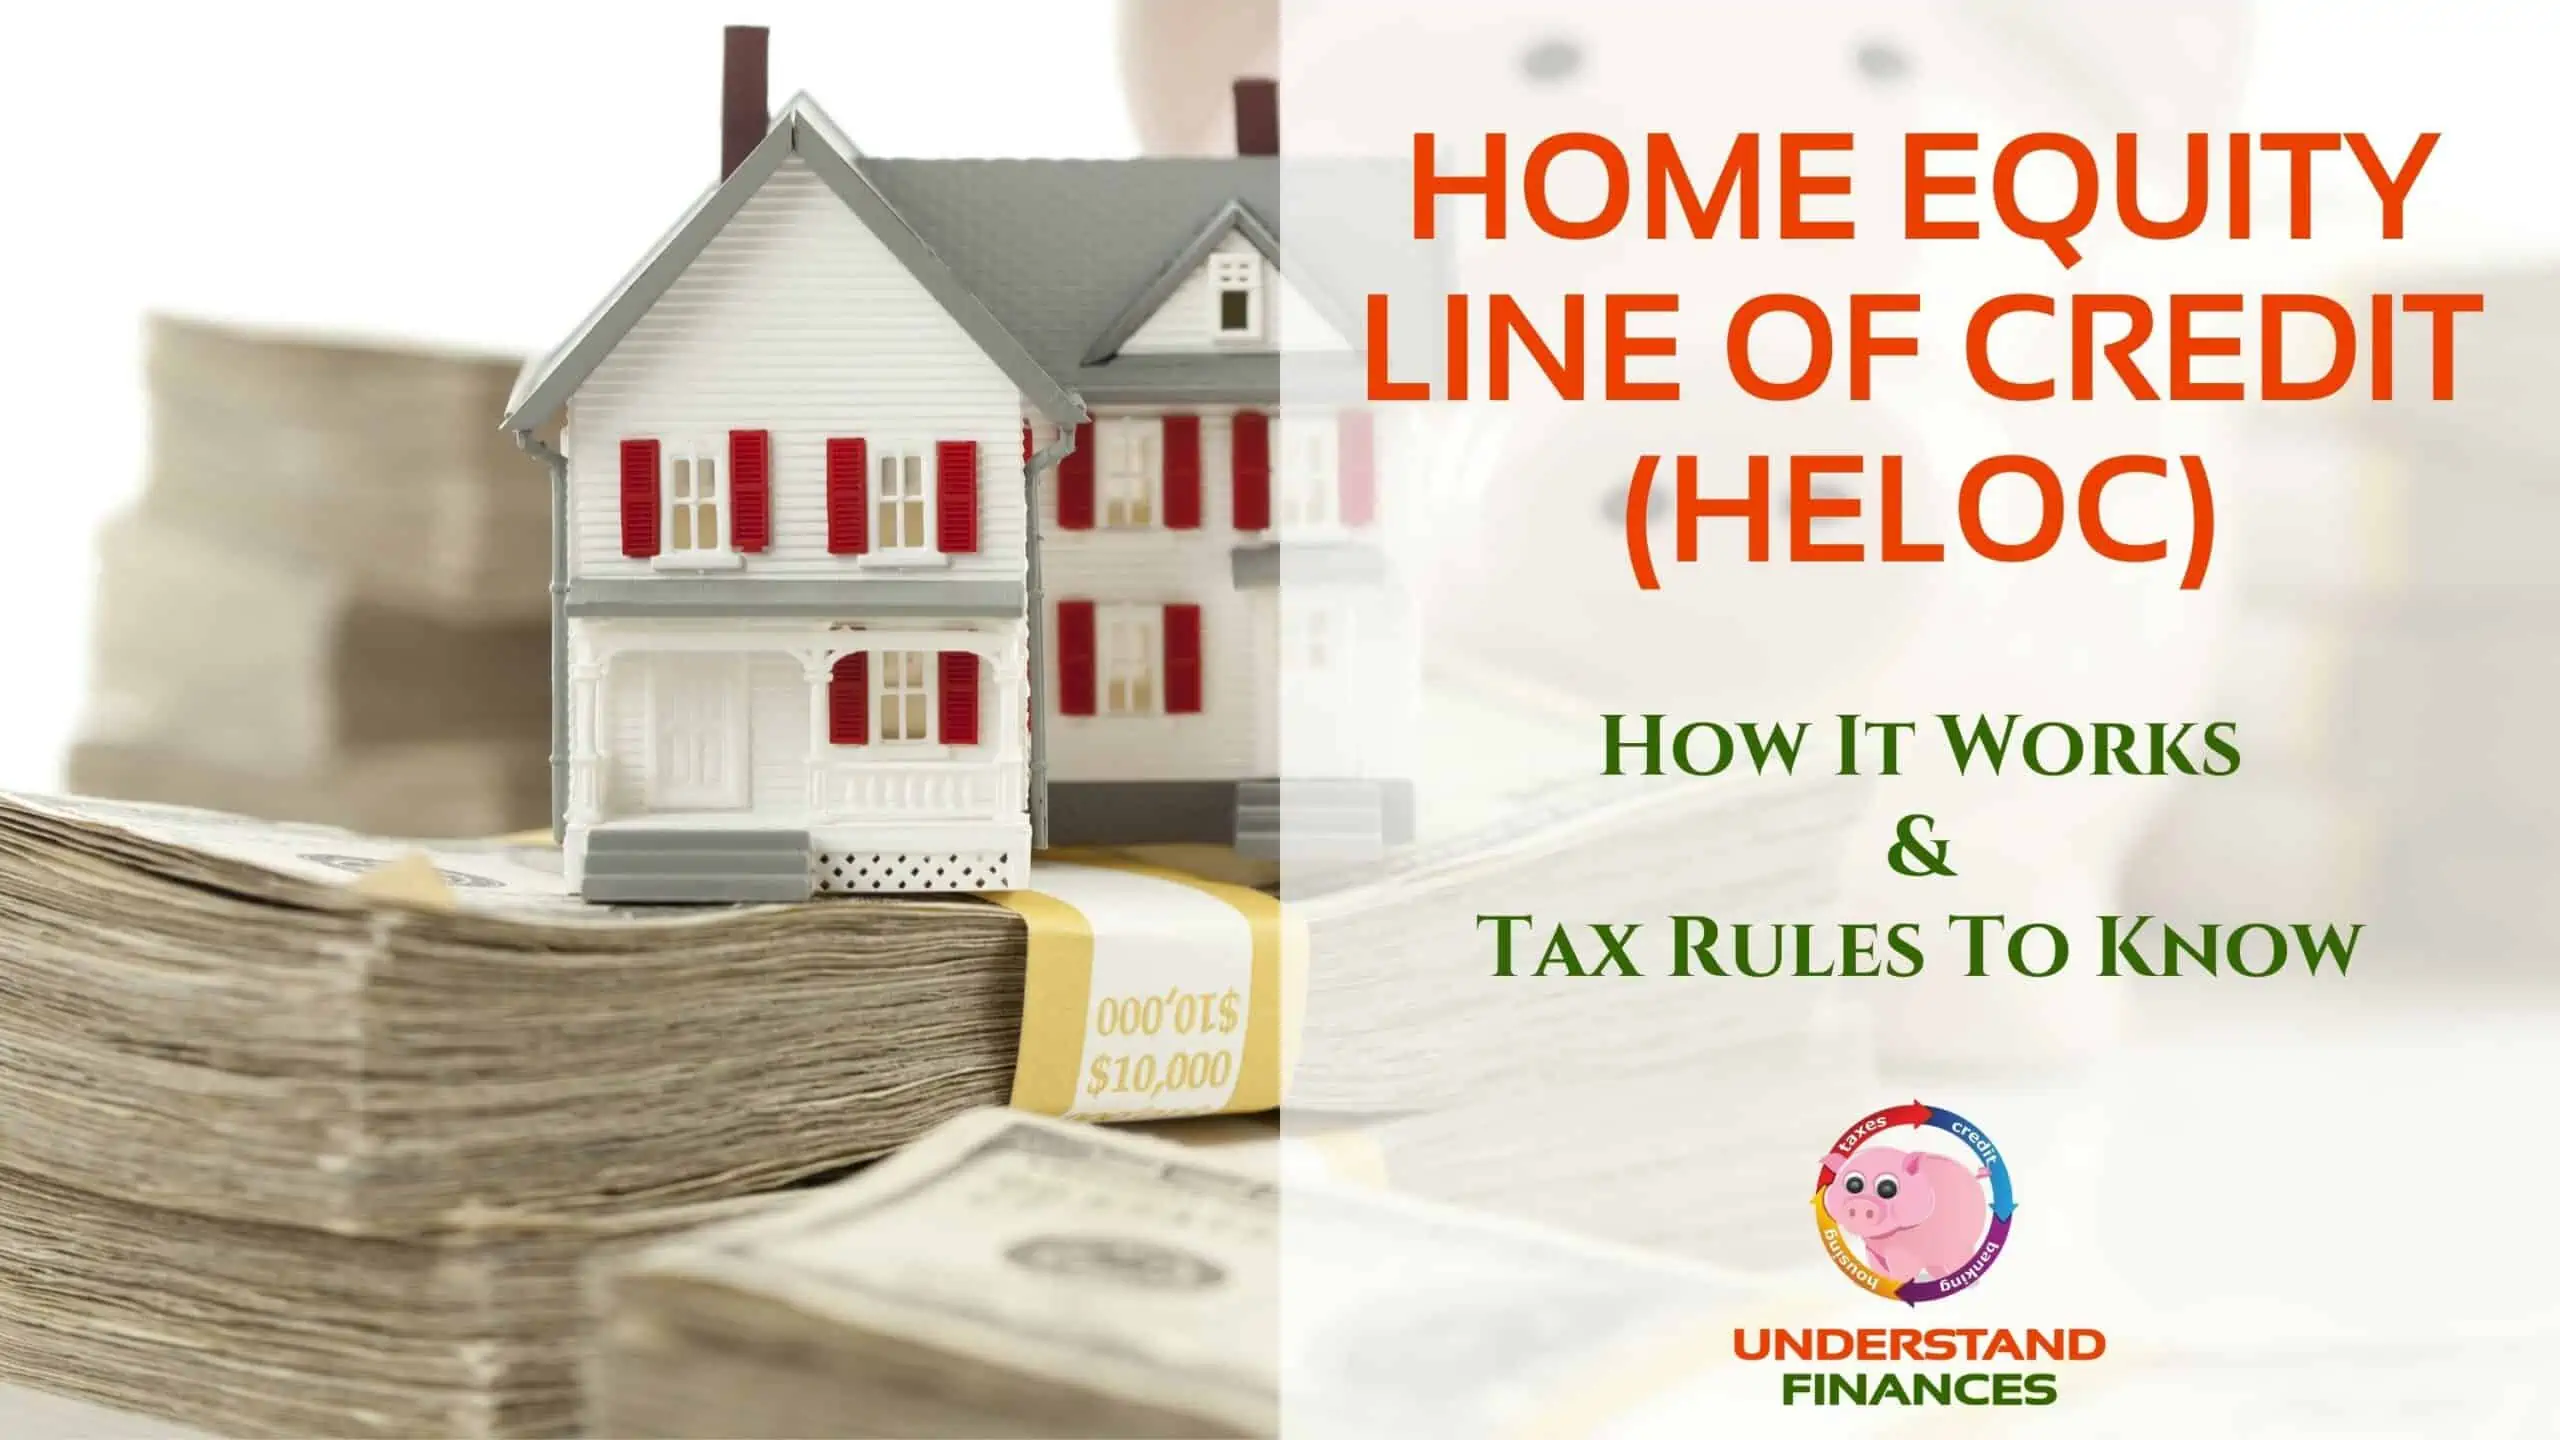 HELOC being represented by a toy house and piggy bank with banded stacks of hundred dollar bills Isolated on a White Background.